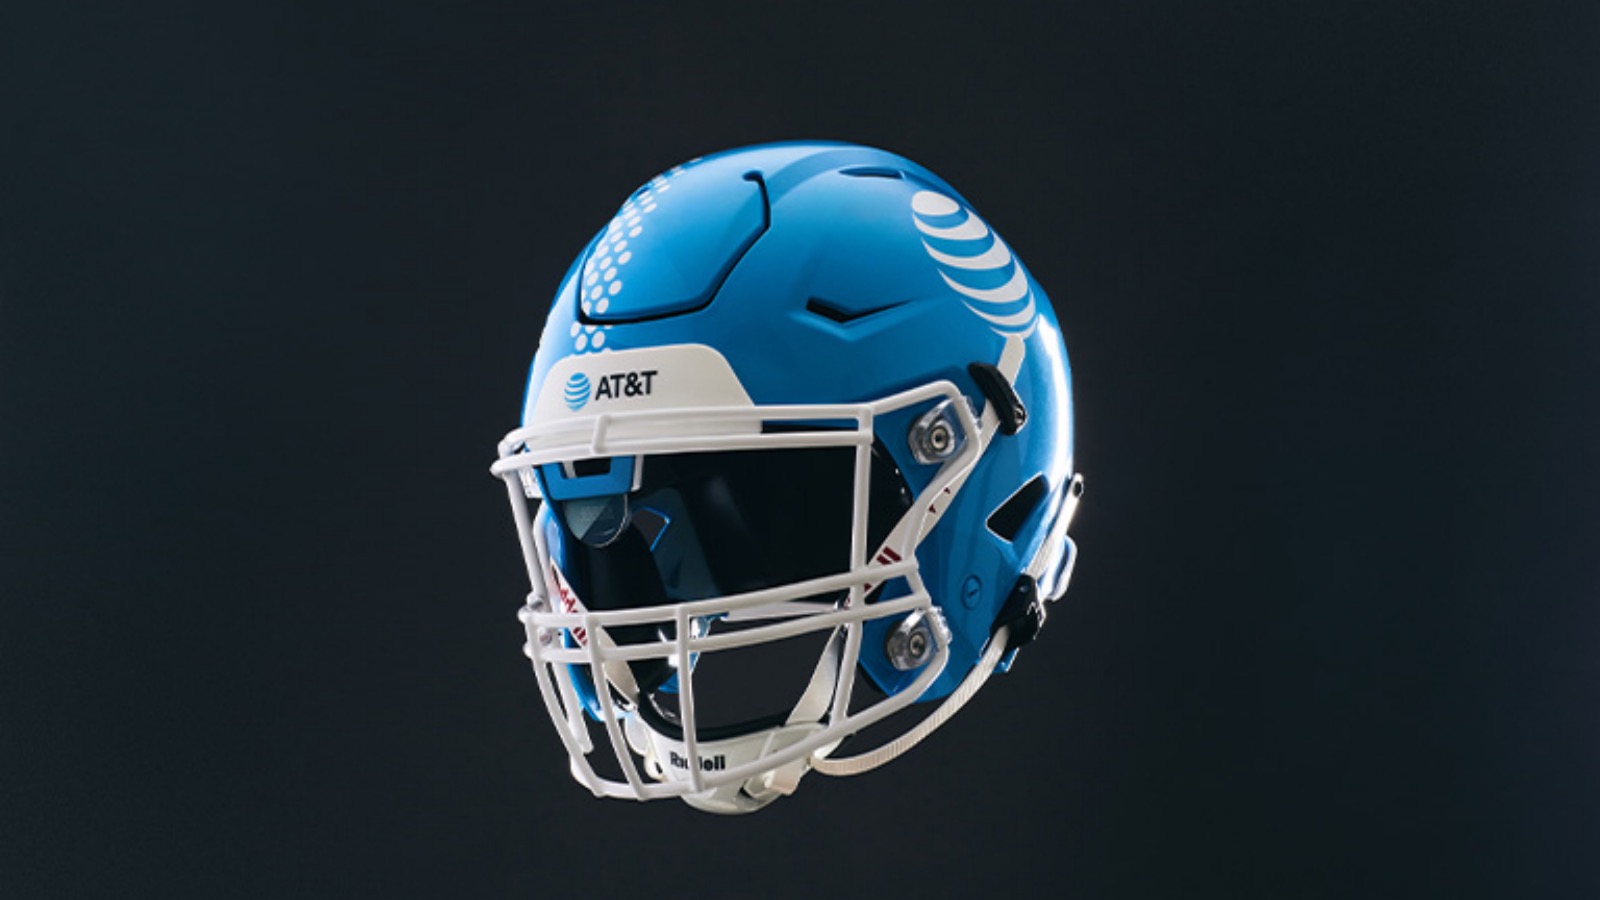 Gallaudet Football augmented reality helmets with AT&T 5G connectivity